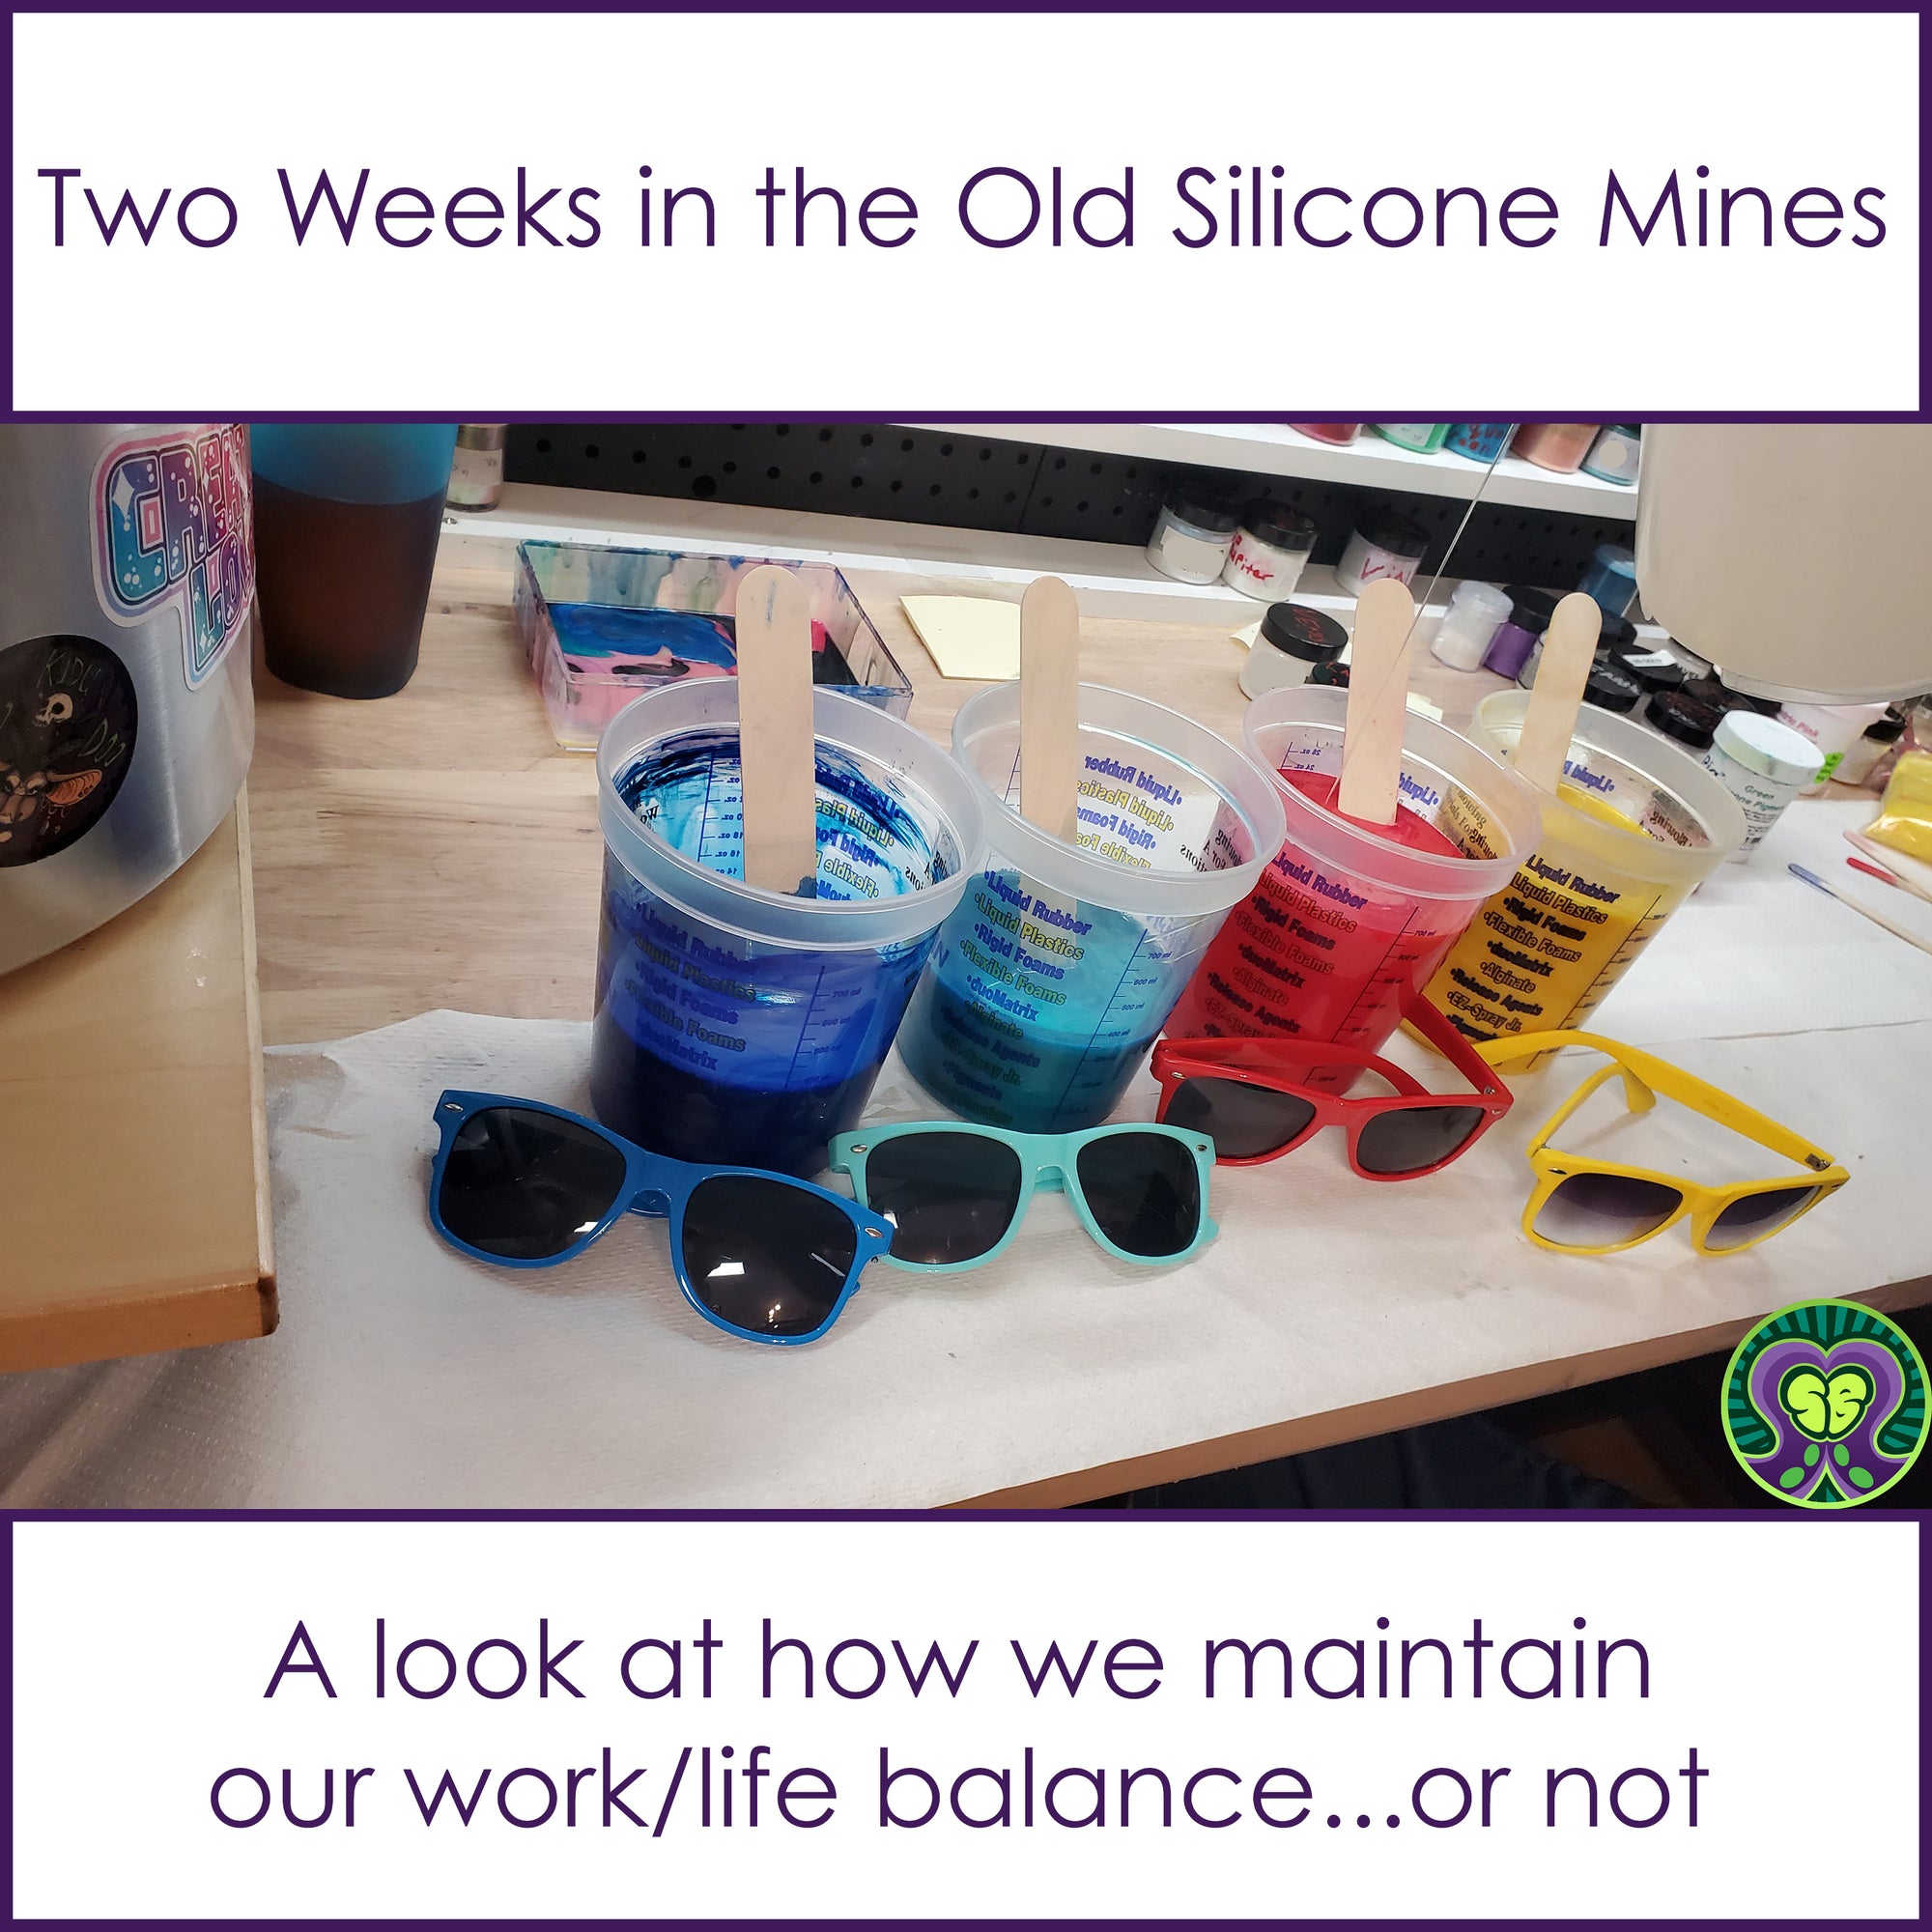 Two Weeks in the Old Silicone Mines